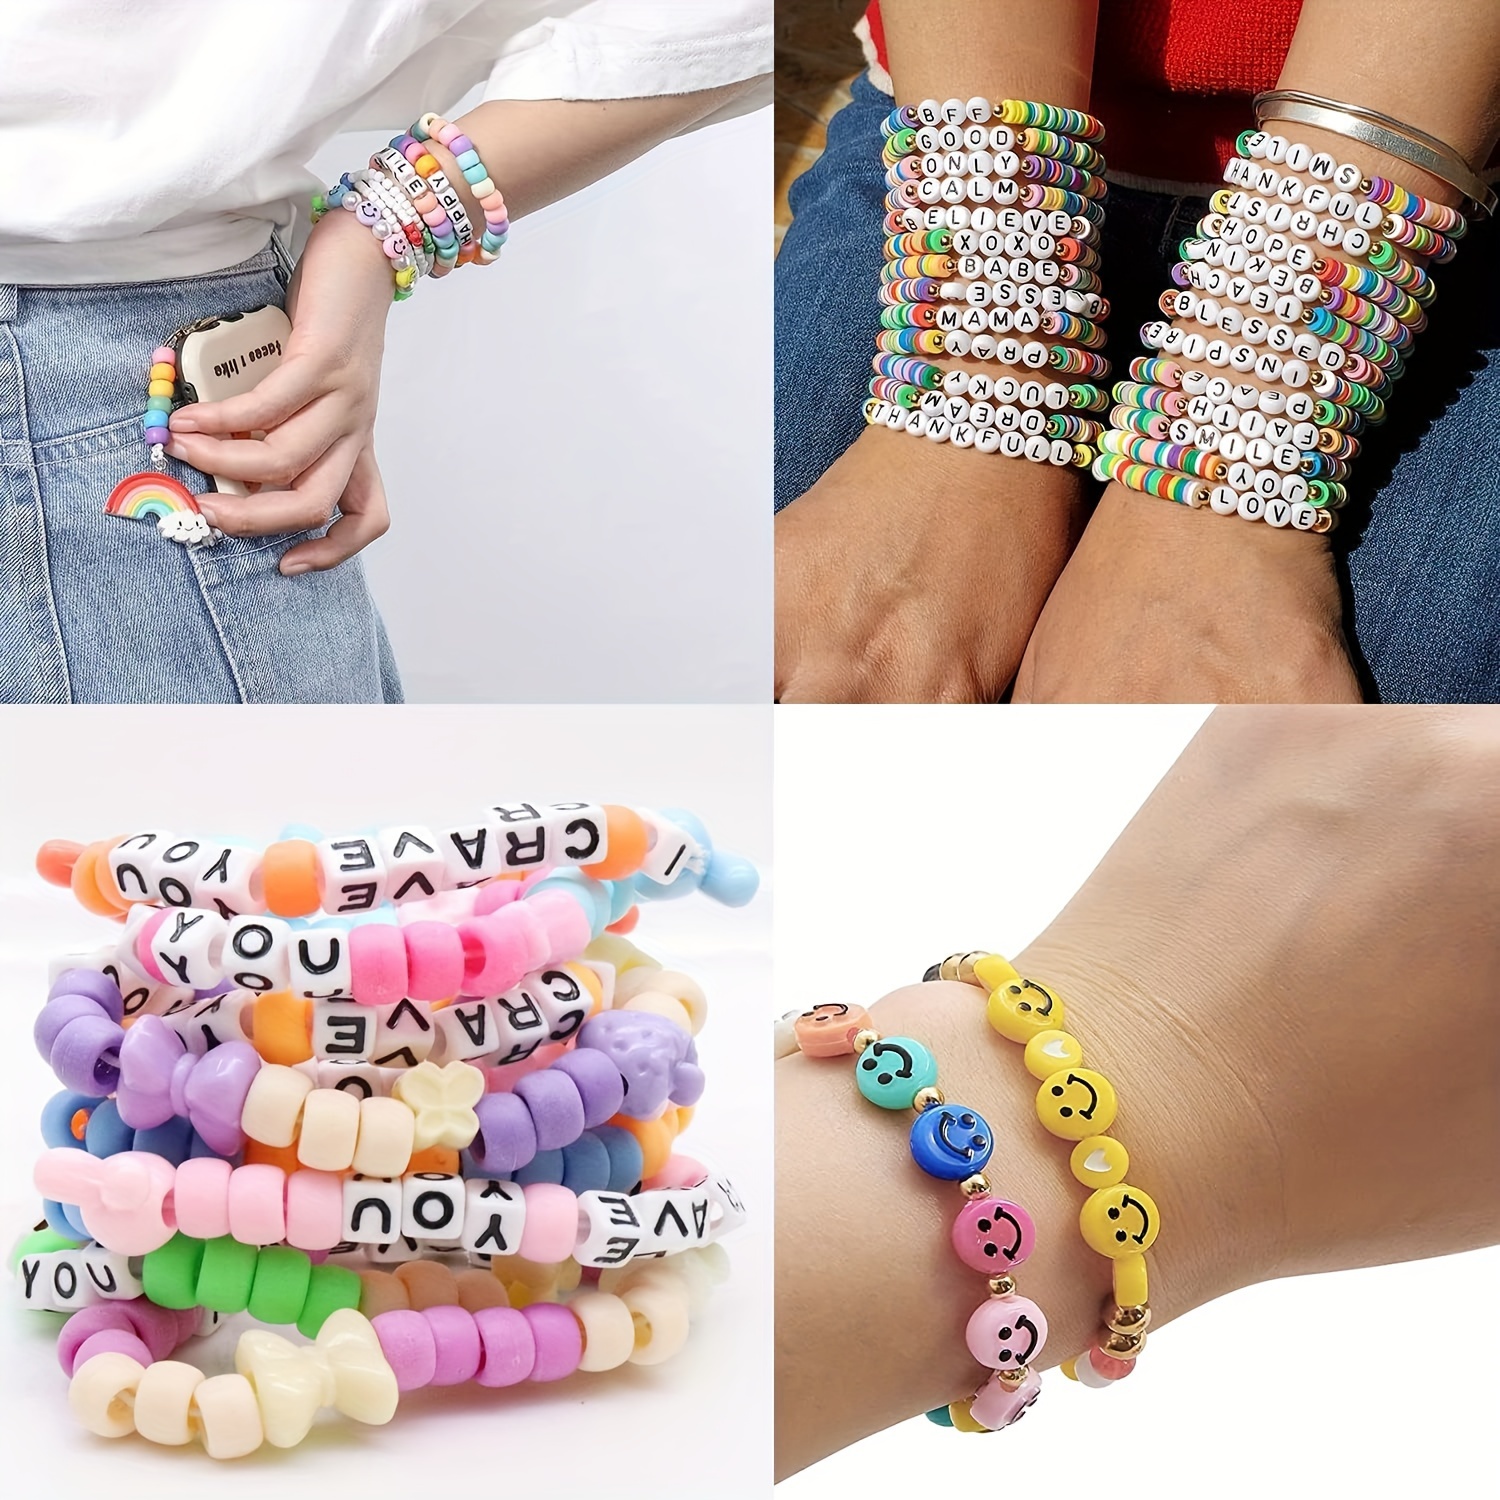 1000 Pieces Bracelet Making Beads ABC Beads Pony Beads Letter